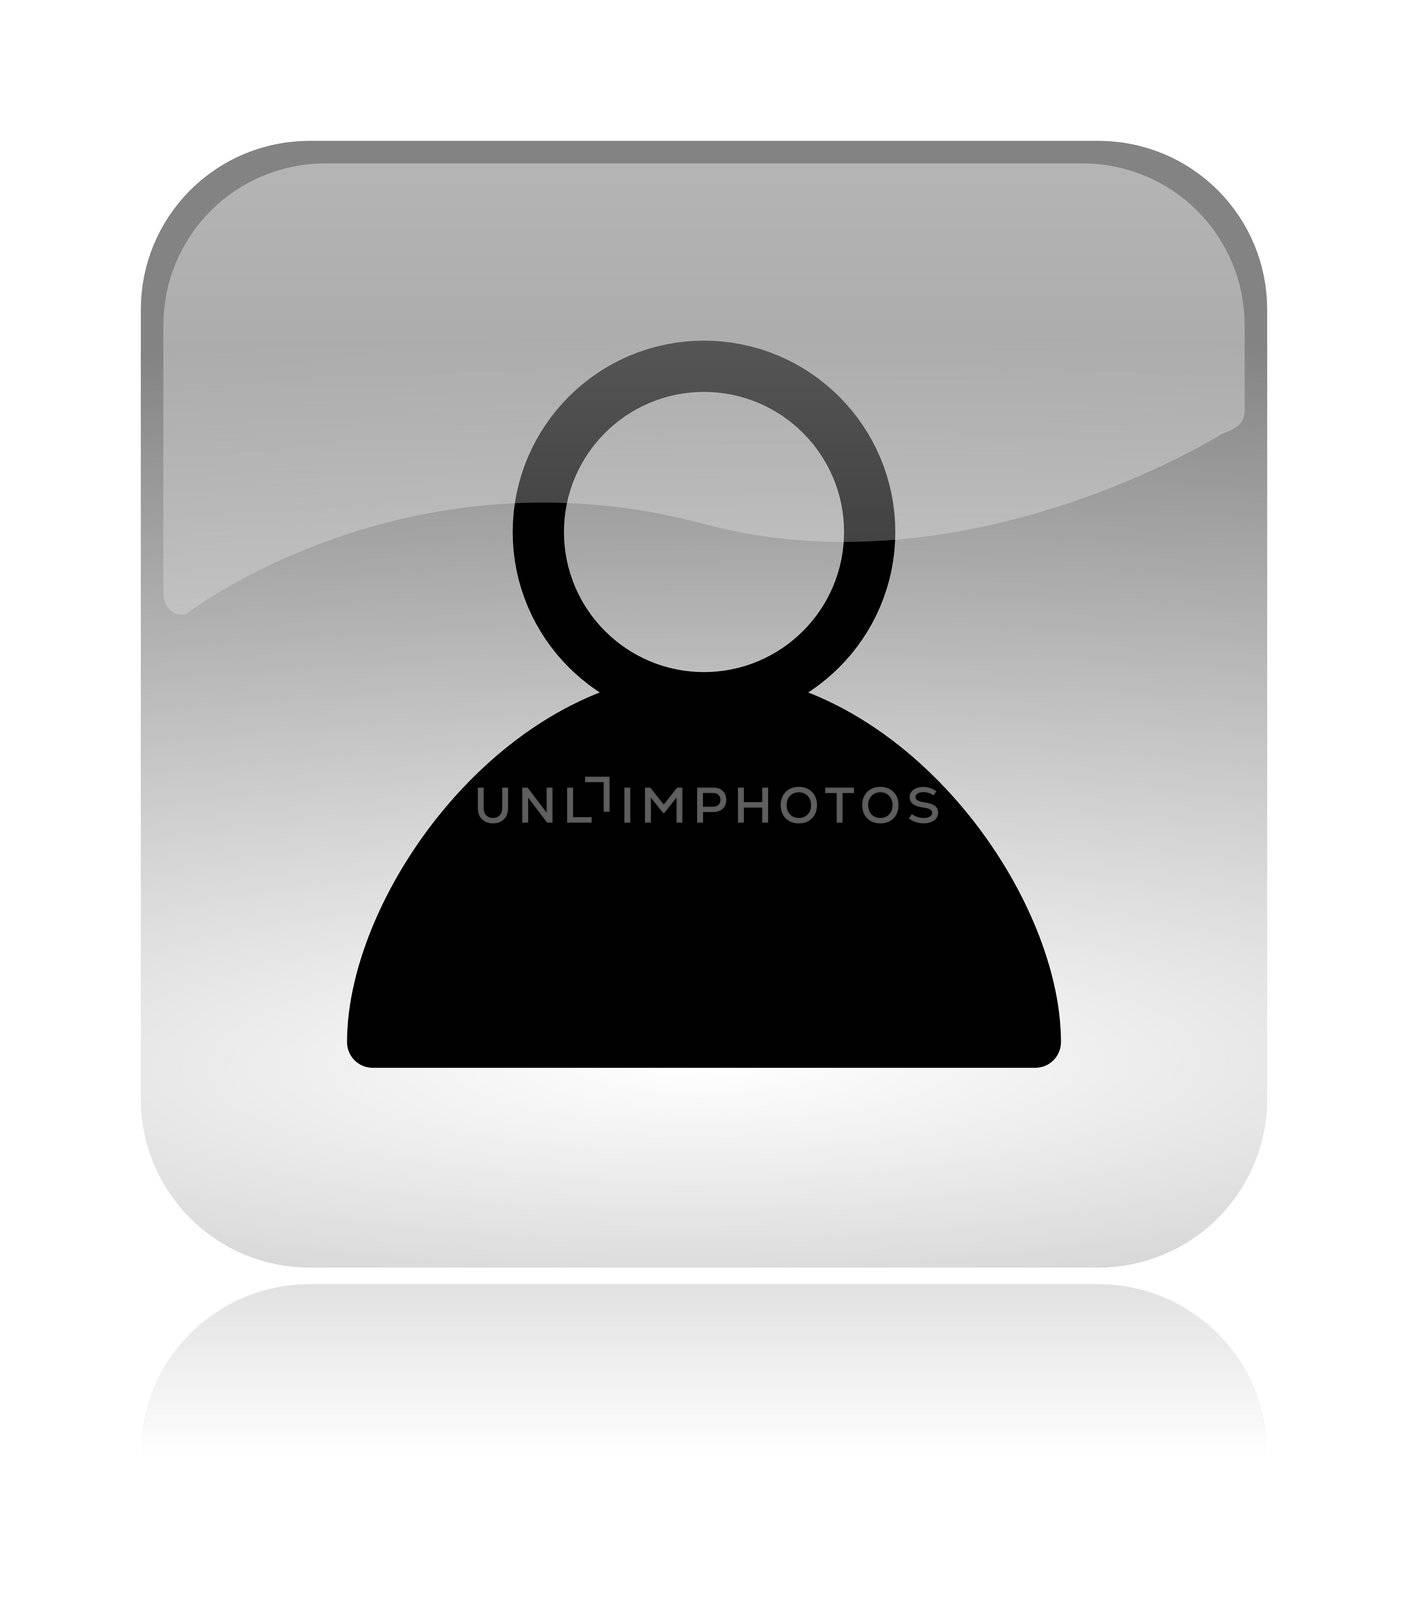 User profile white, transparent and glossy web interface icon with reflection